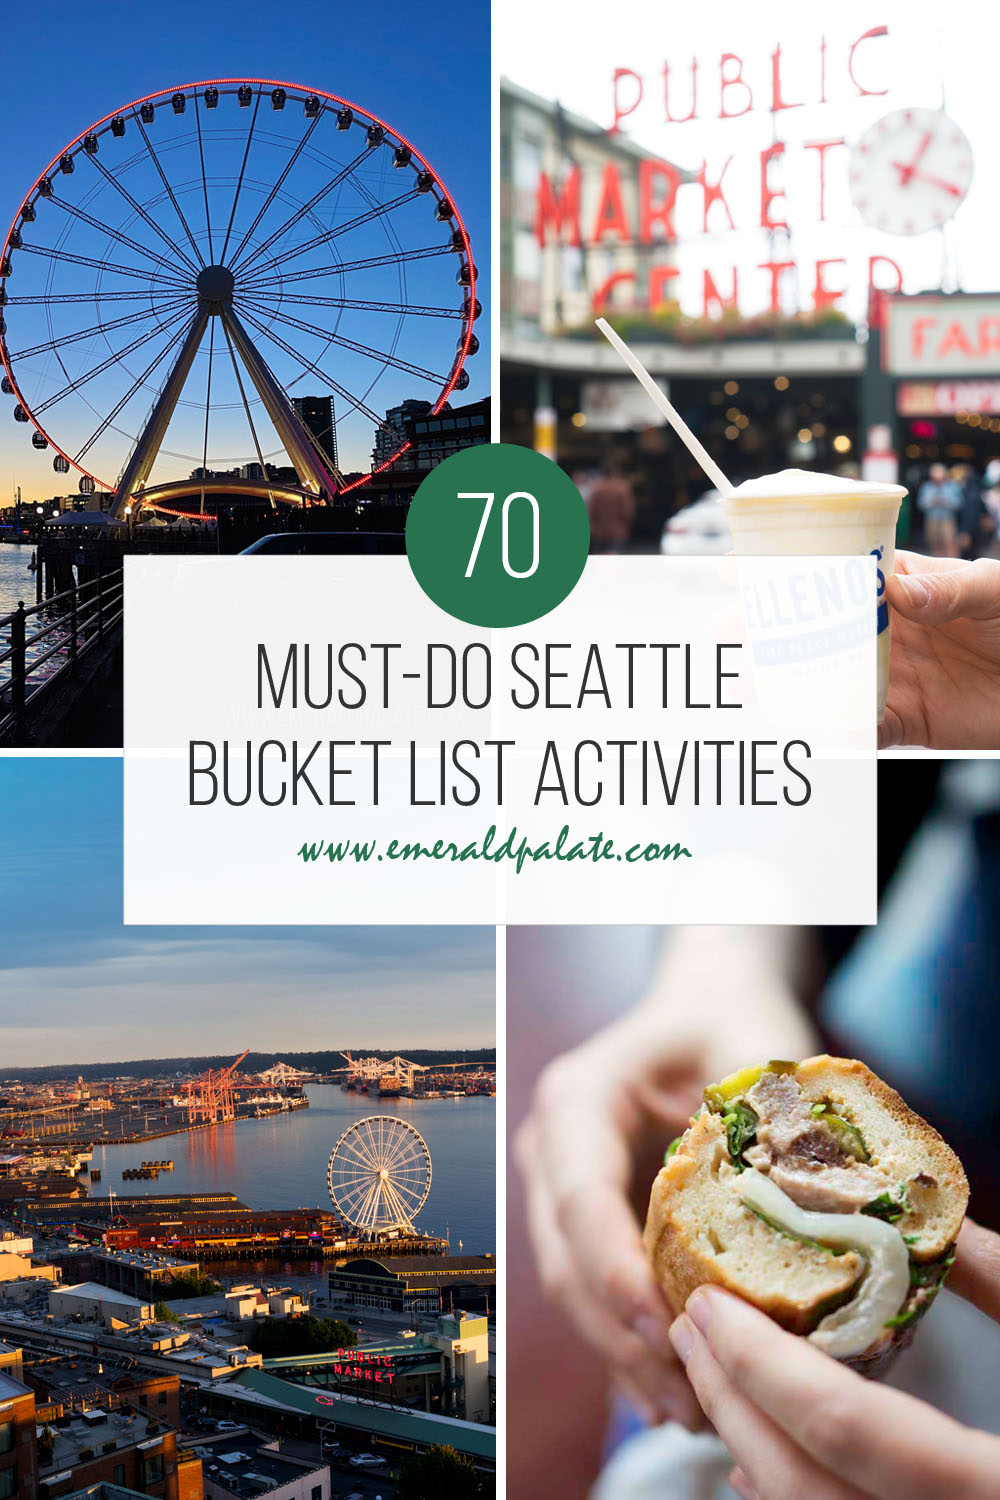 must-do Seattle bucket list activities curated by a local. From the best Seattle tourist attractions to hidden gems only locals know, here are all the things to do in Seattle whether you're a local yourself or a first time Seattle visitor!